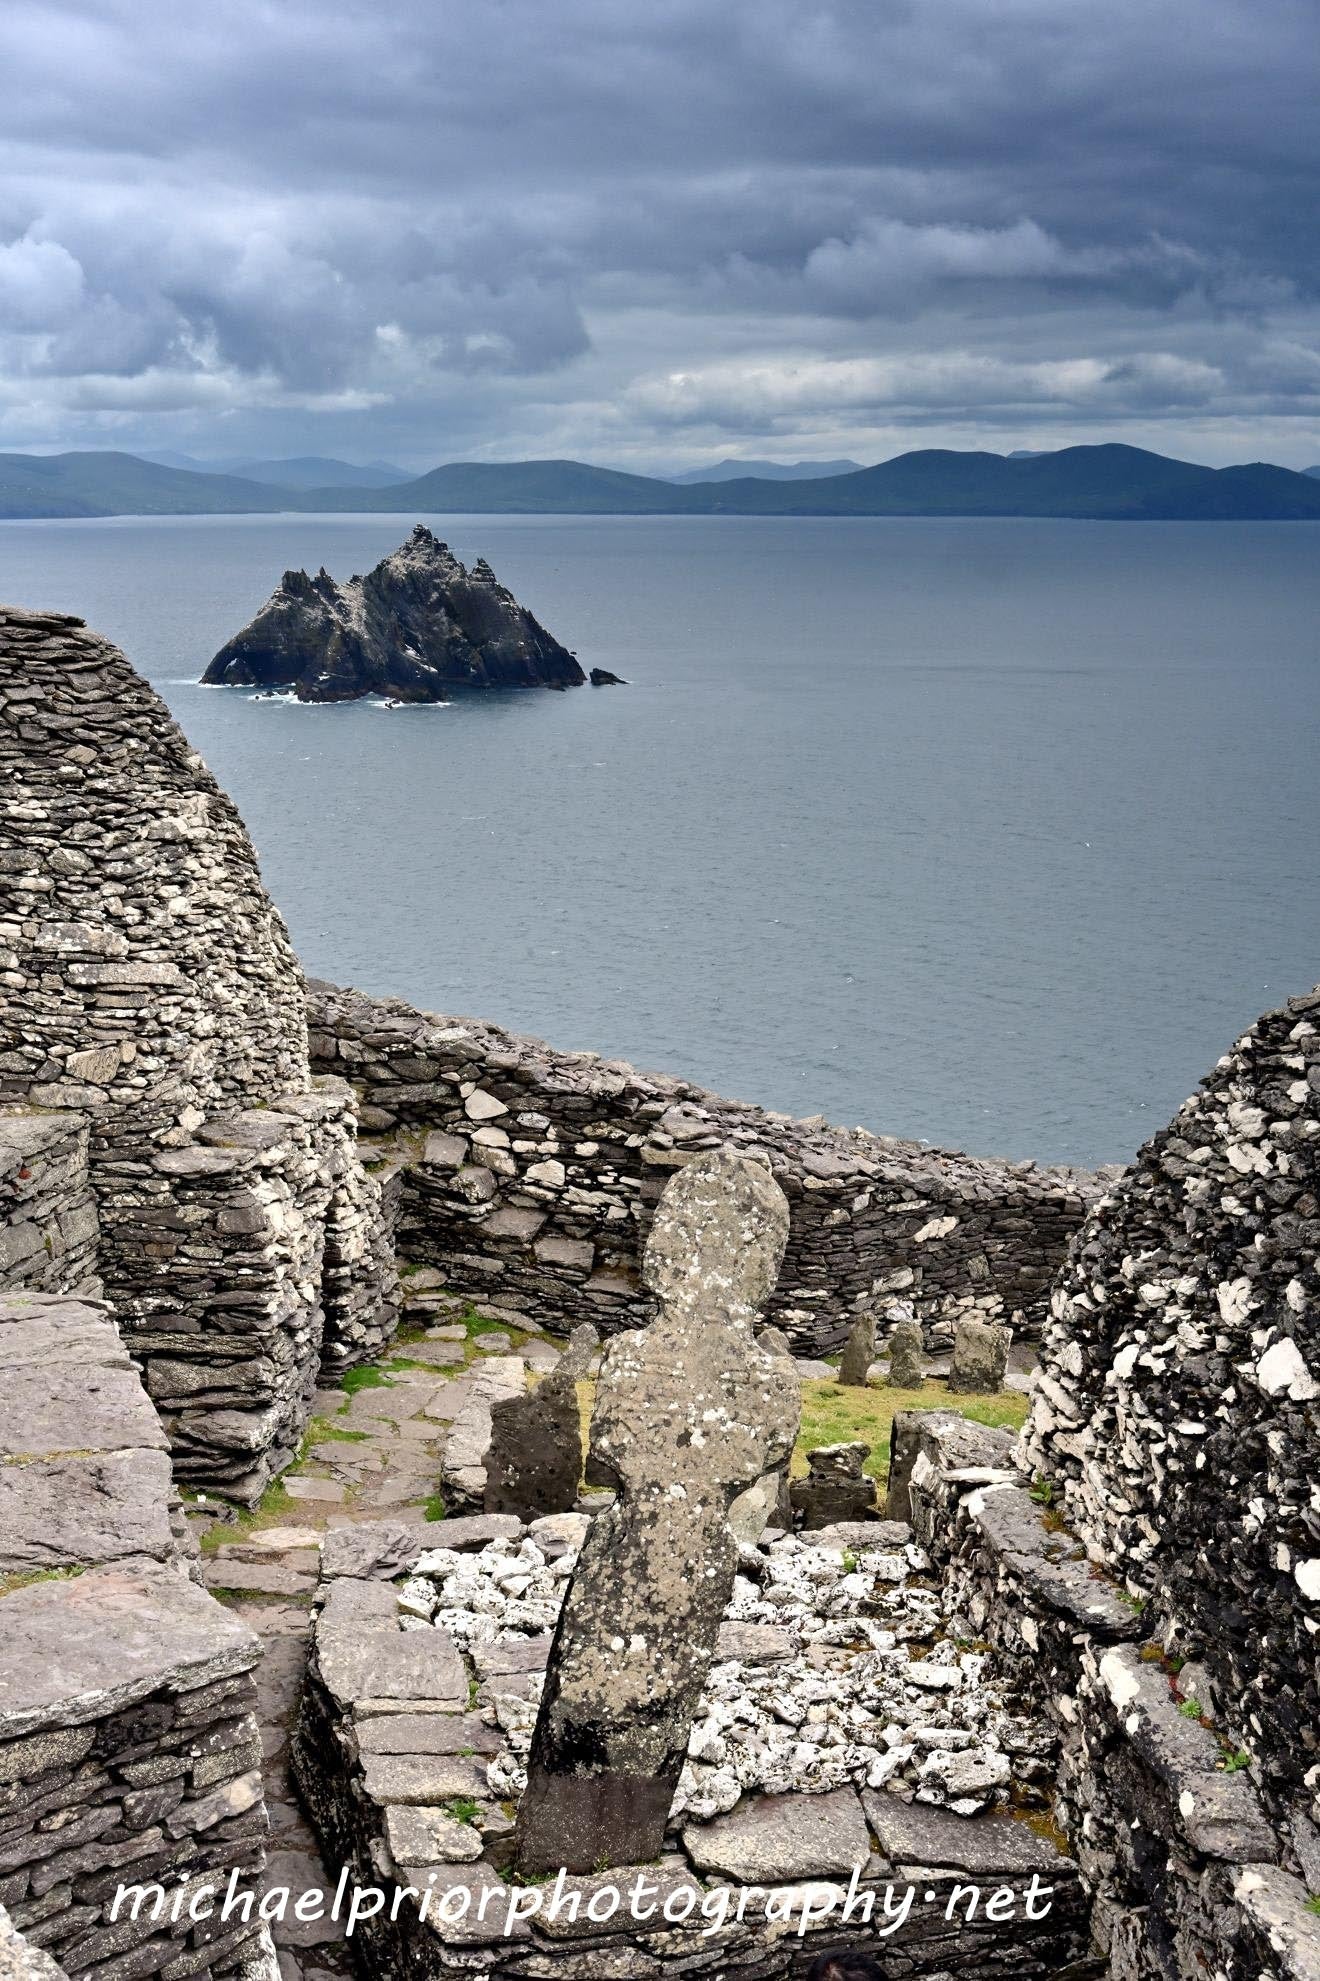 The little Skellig from the beehive huts on Skellig Michael